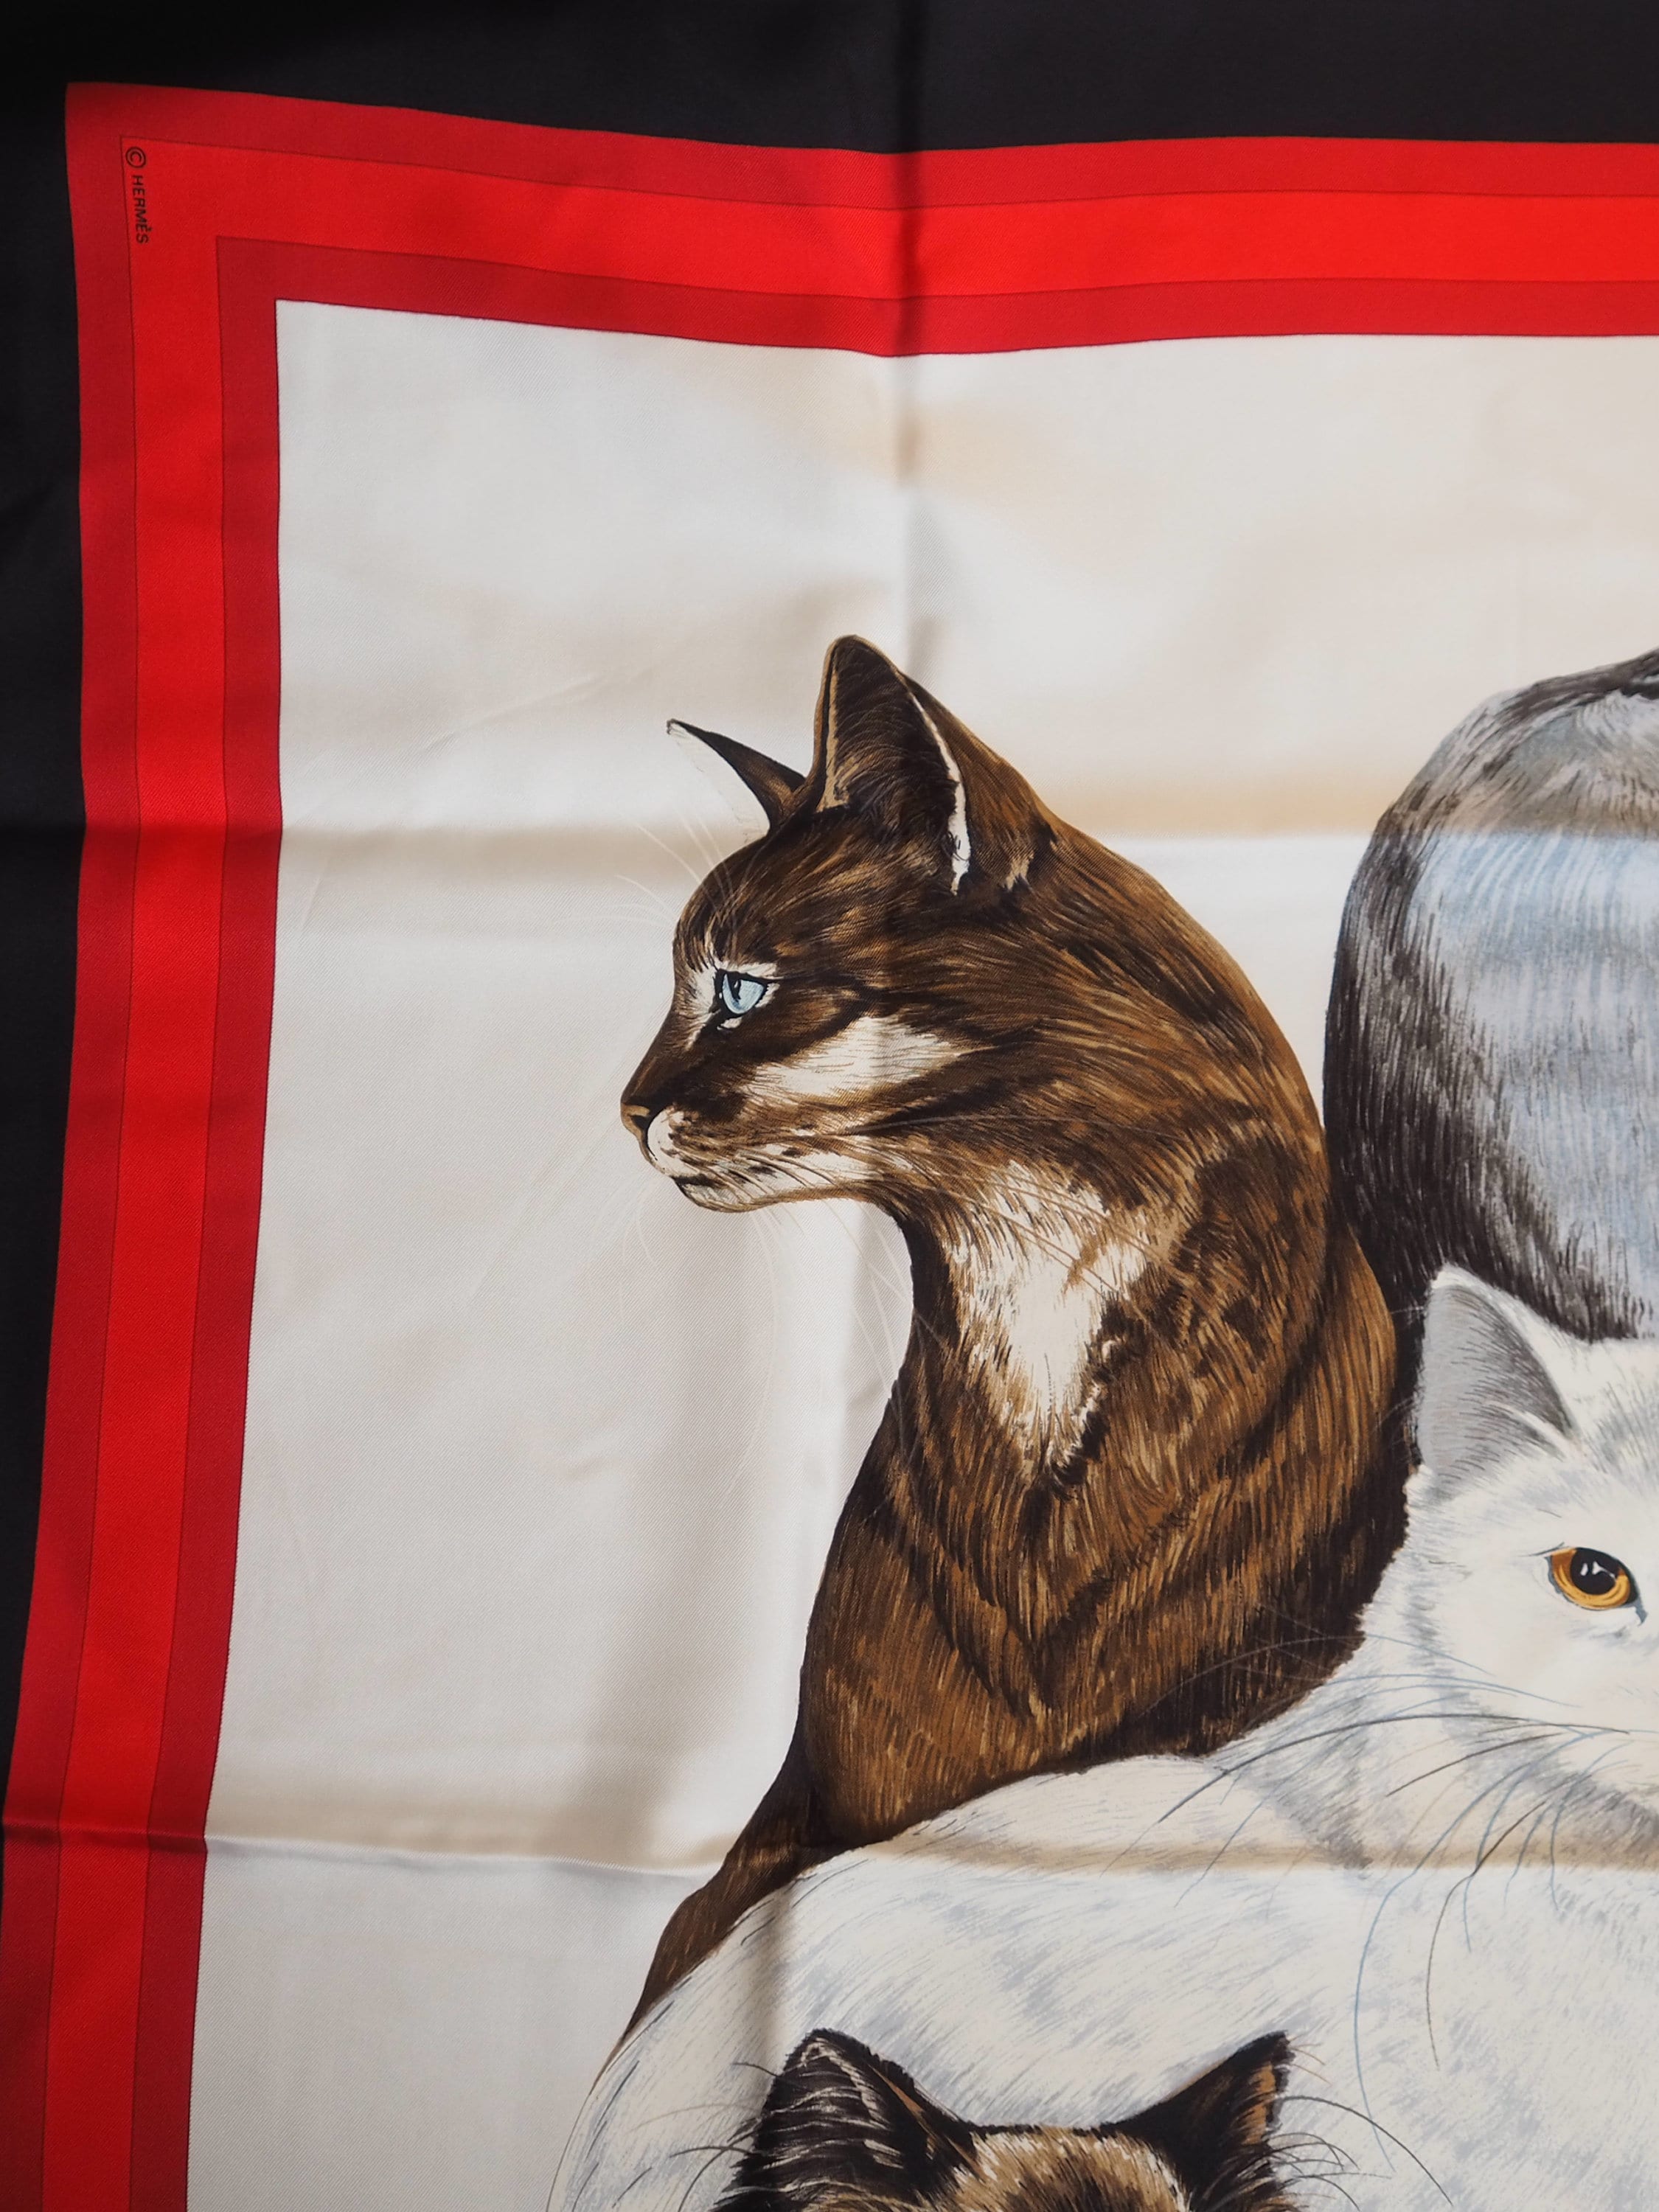 HERMES " Les Chats " Cat Scarf Carre 90 Black Red White Vintage Authentic RARE